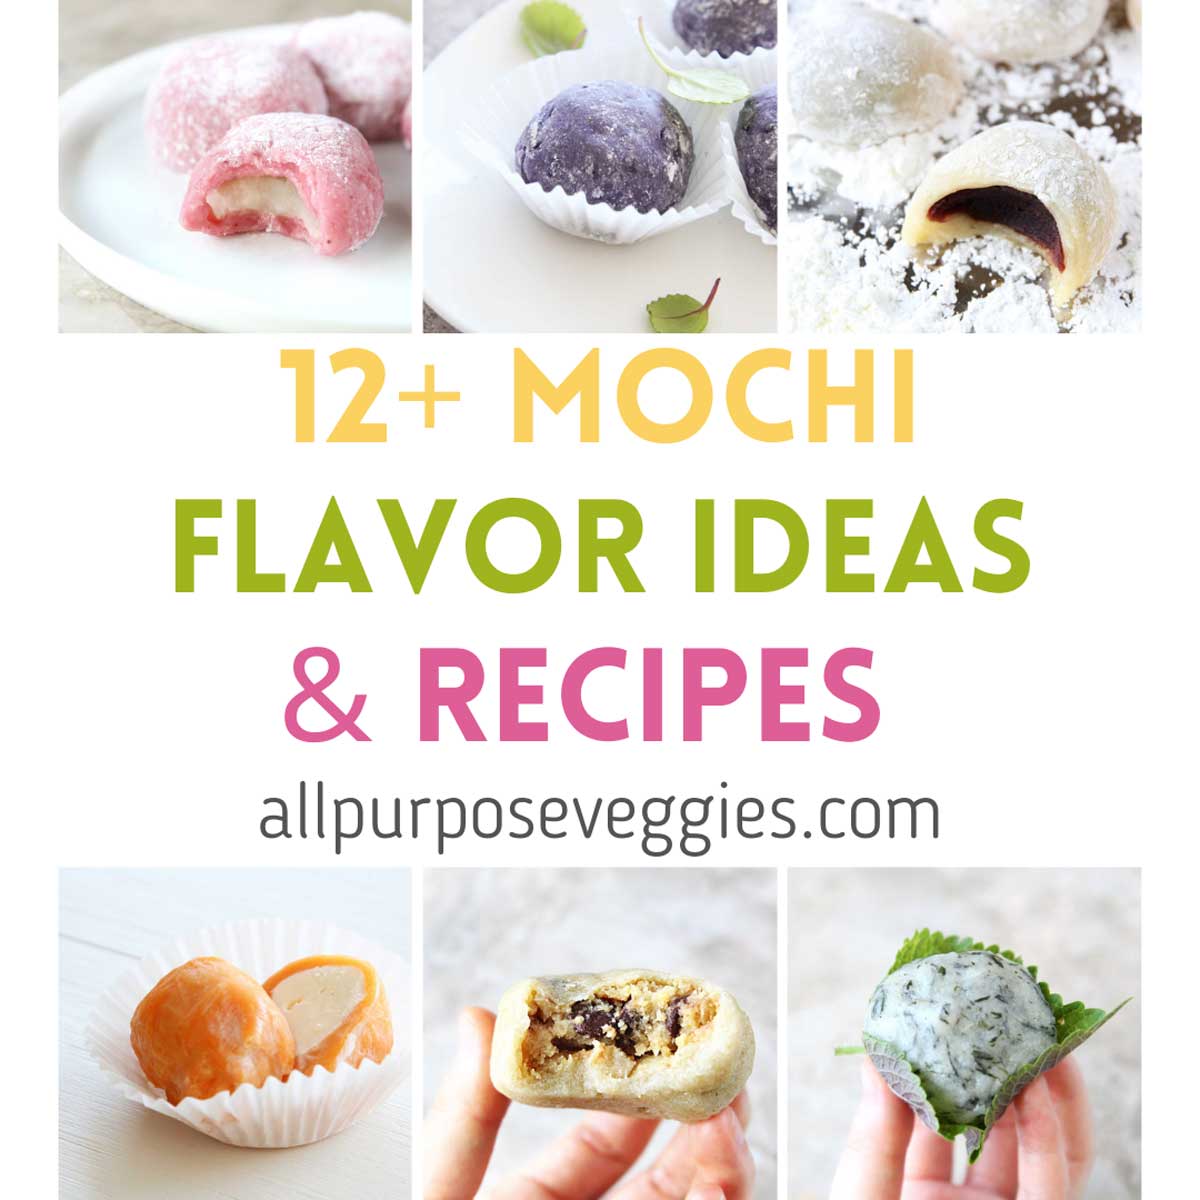 The Ultimate List of Mochi Flavors & Ideas (with 20 Easy Recipes) - Steamed Bun Filling